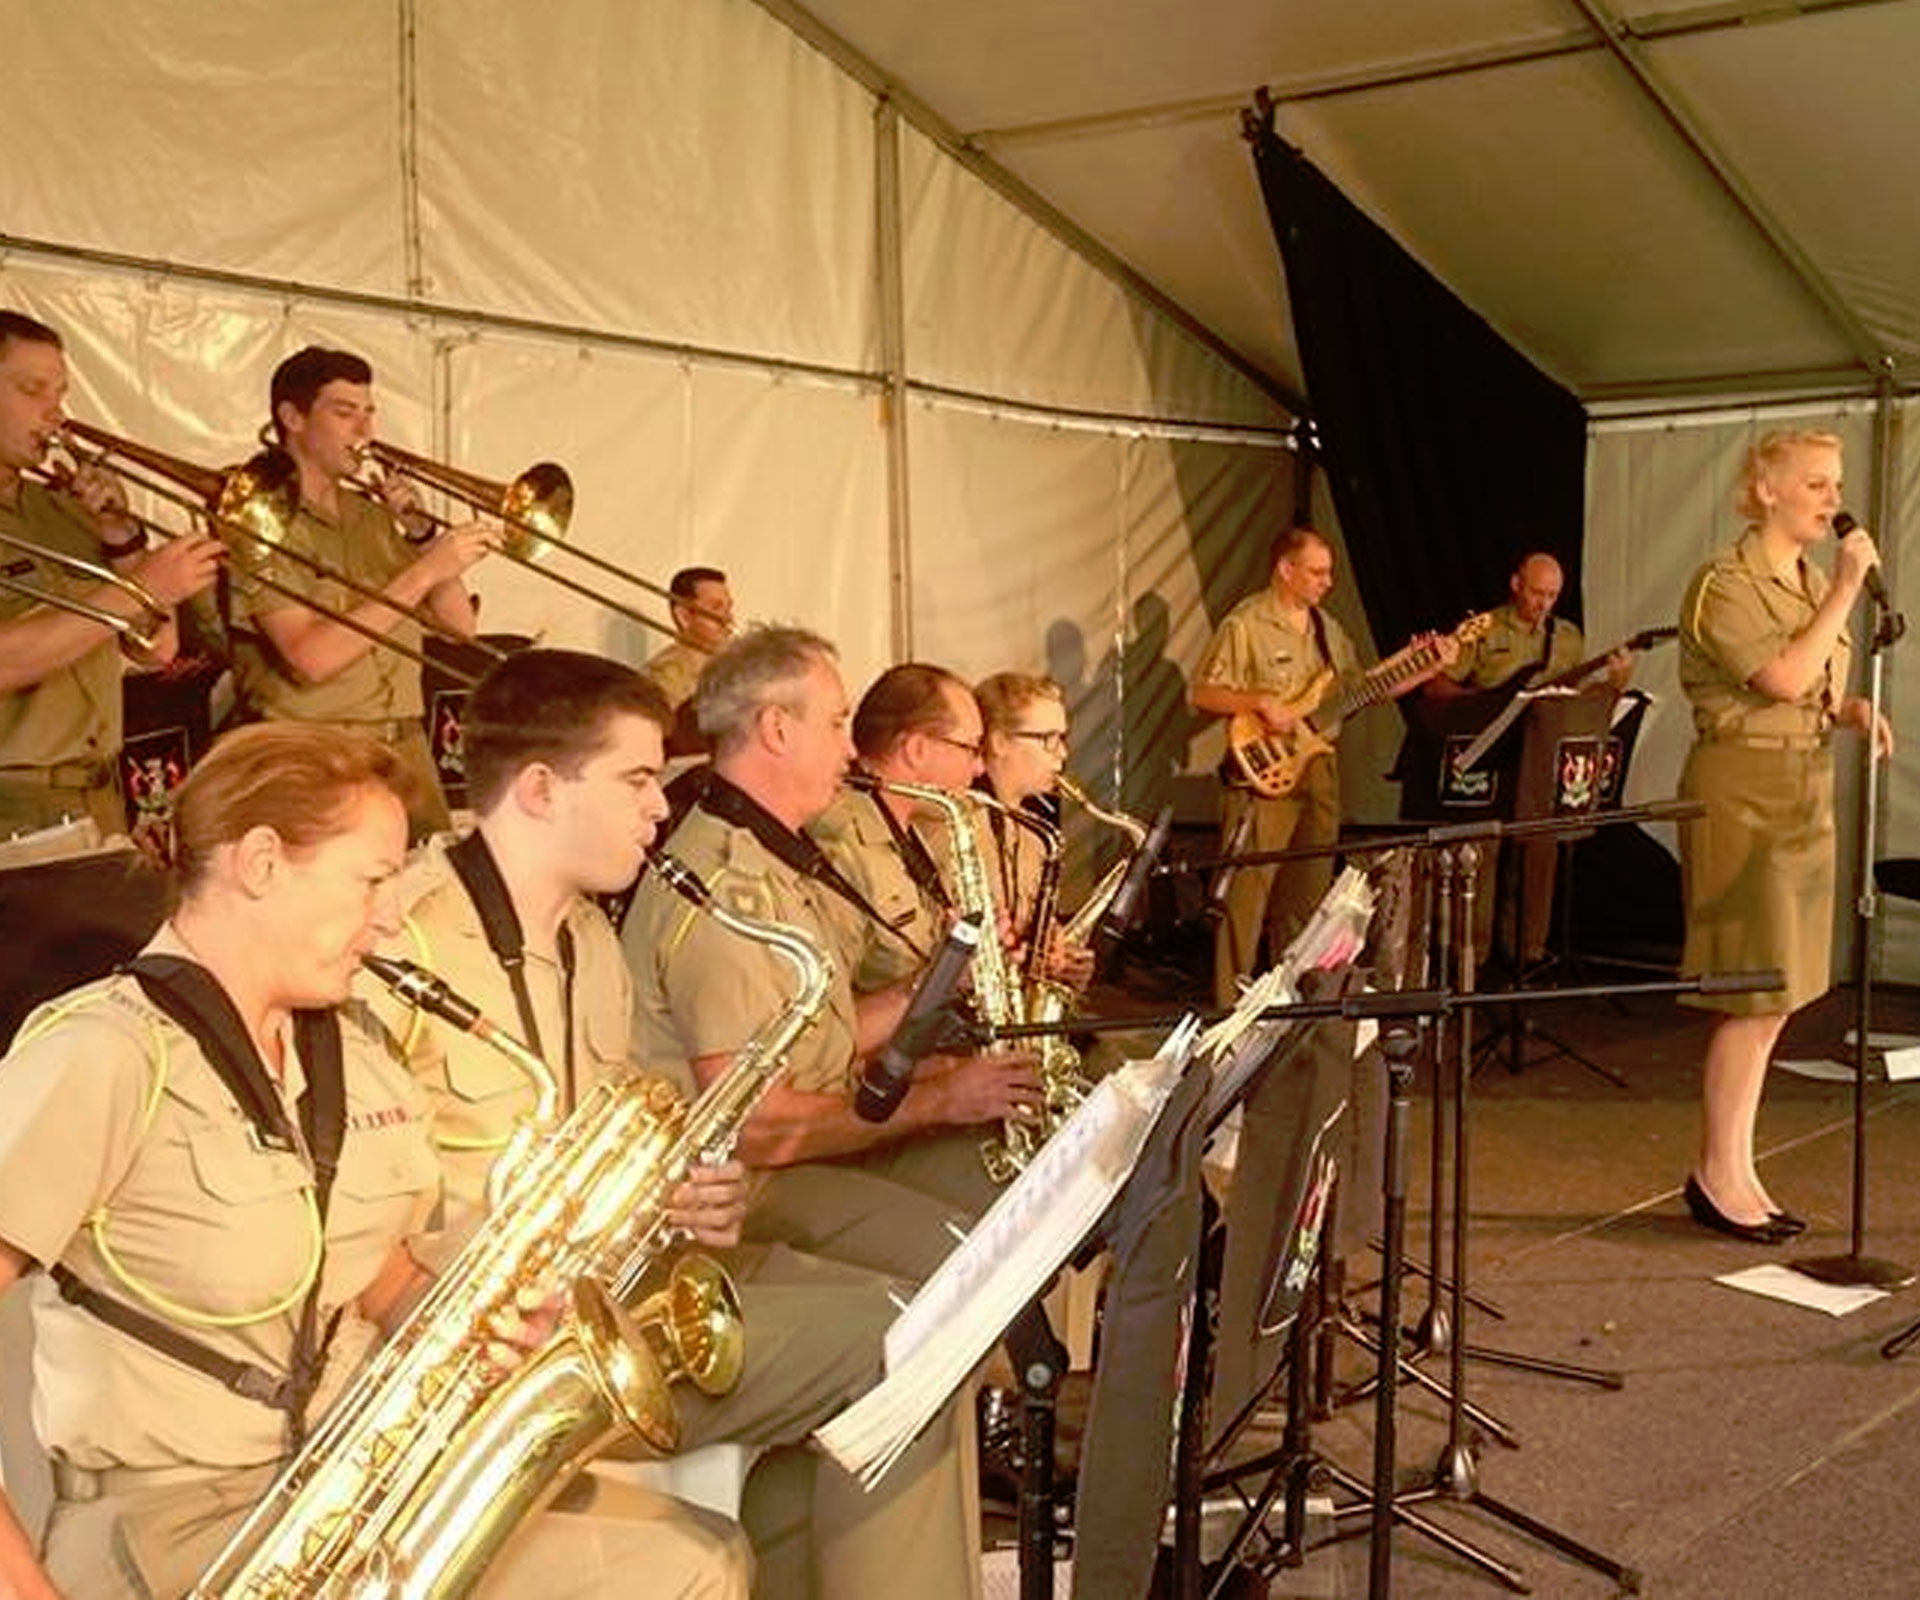 ANZAC Day Tribute: Australian Army band’s emotional cover of I Was Only 19